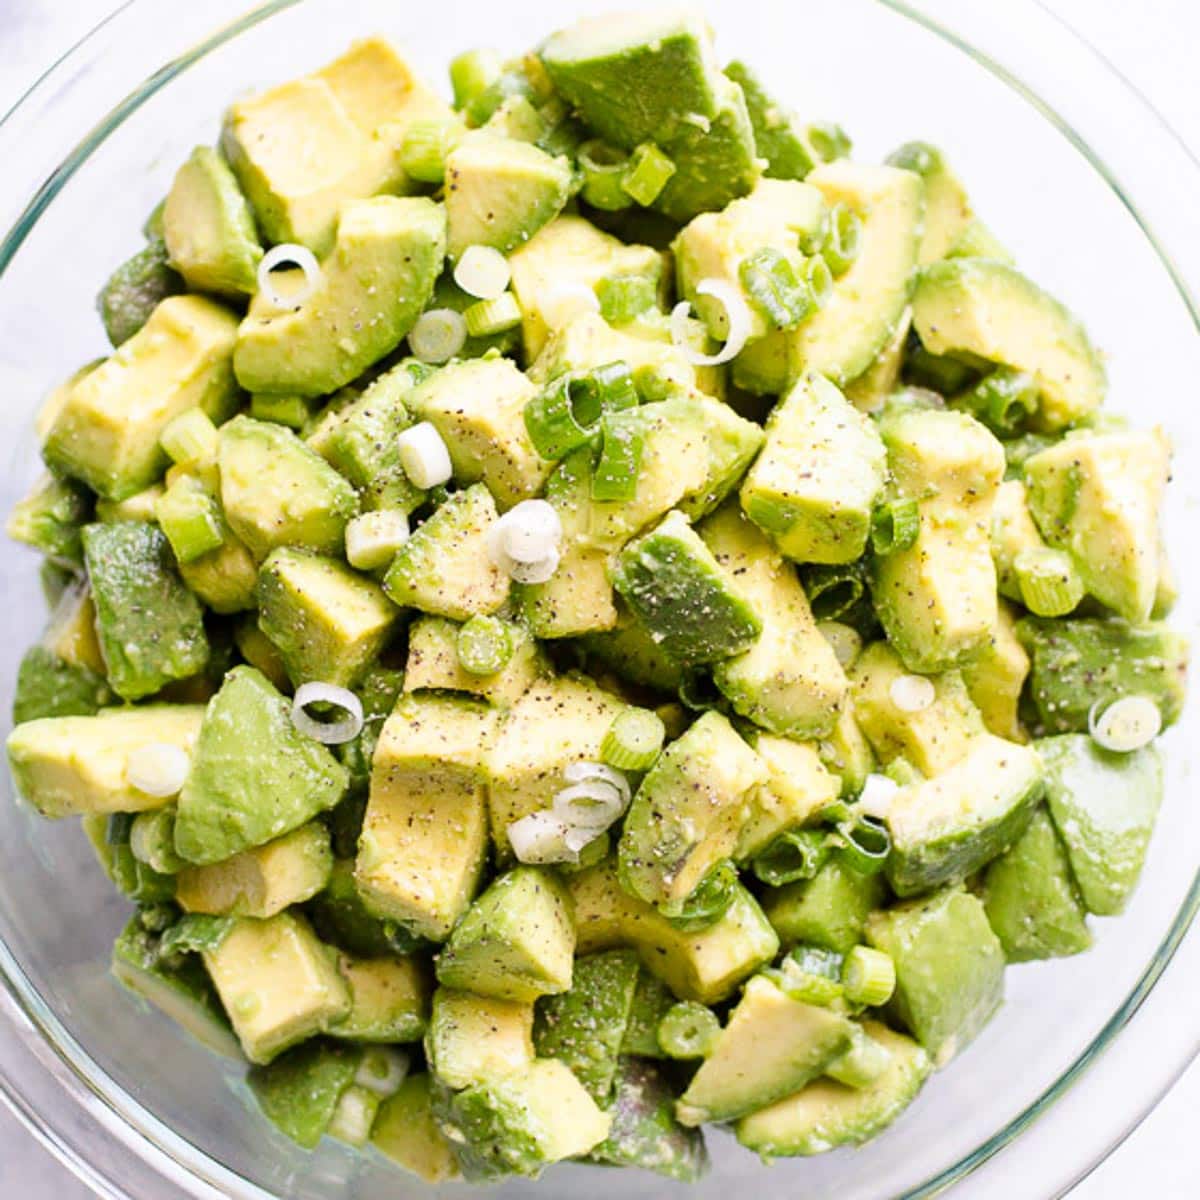 Simple avocado salad in a bowl with green onions.